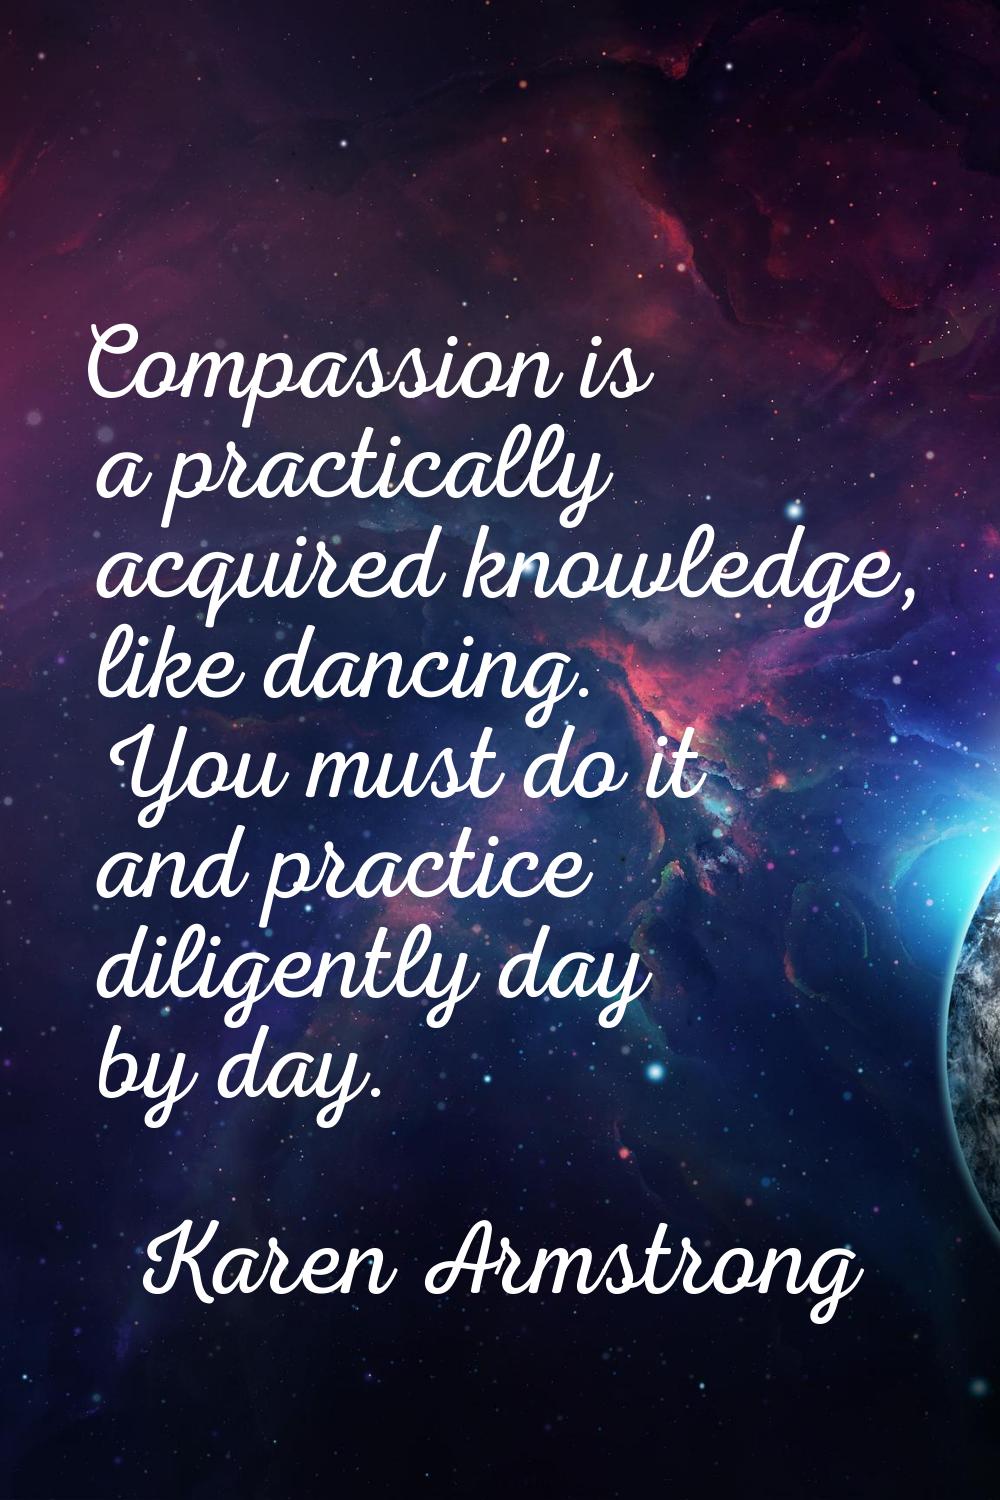 Compassion is a practically acquired knowledge, like dancing. You must do it and practice diligentl